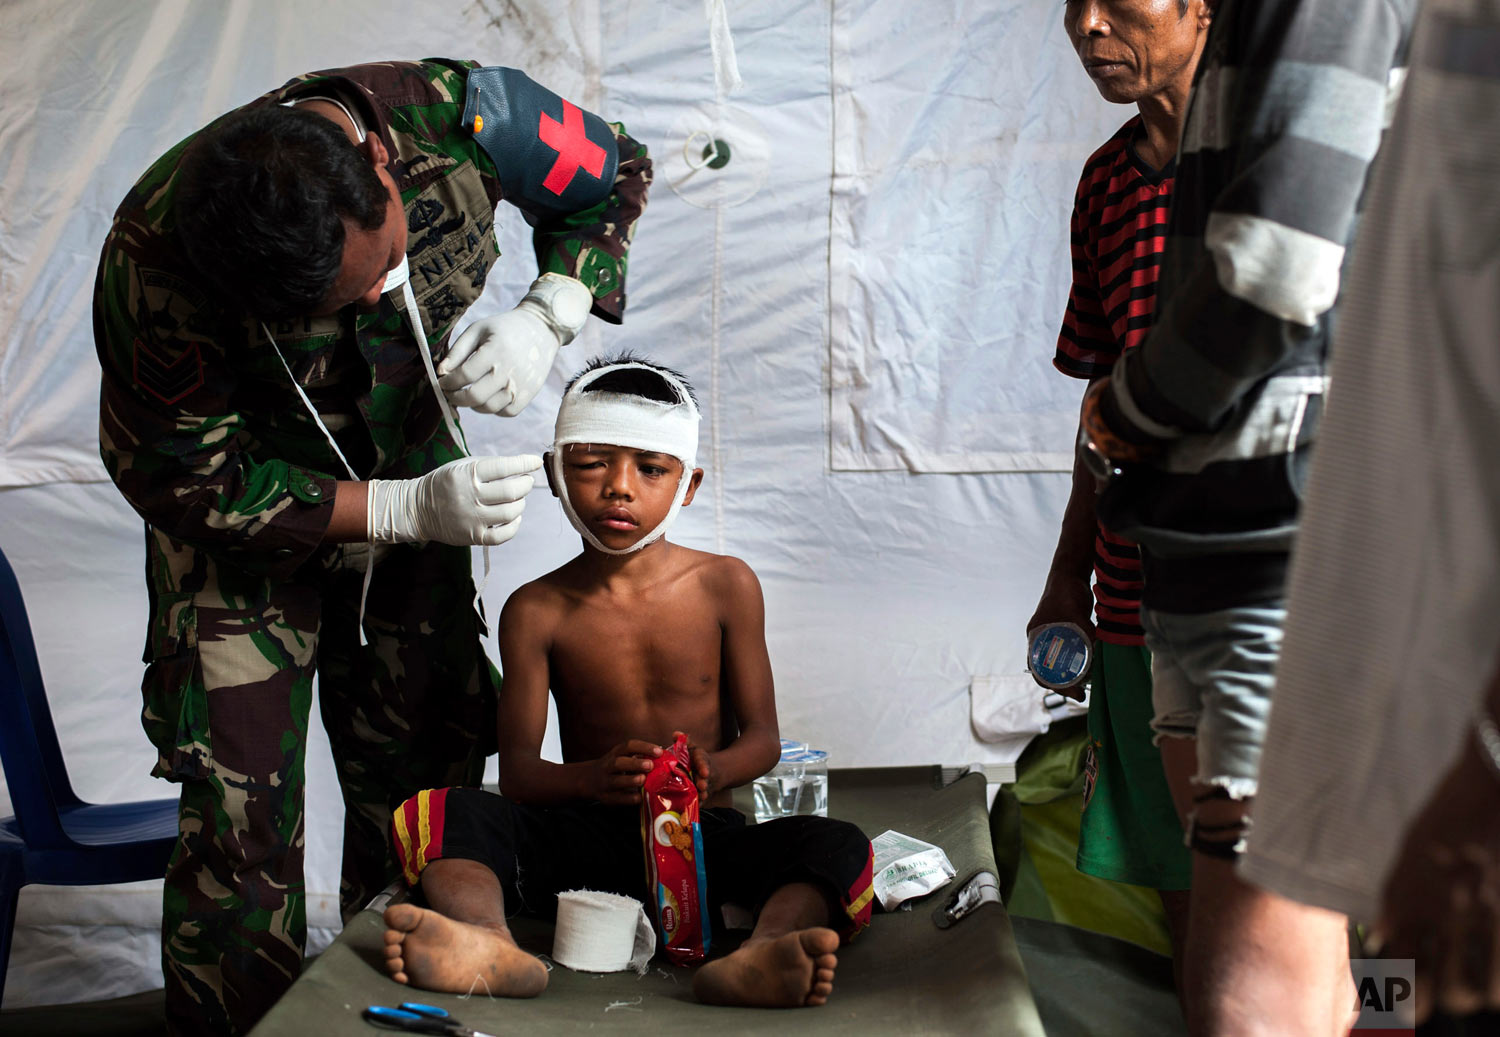  A military paramedic tends to a boy who's head was injured from Sunday's earthquake at a makeshift hospital in Kayangan, Lombok Island, Indonesia, Wednesday, Aug. 8, 2018. The north of Lombok has been devastated by the magnitude 7.0 quake that struck Sunday night, damaging thousands of buildings and killing dozens. (AP Photo/Fauzy Chaniago) 